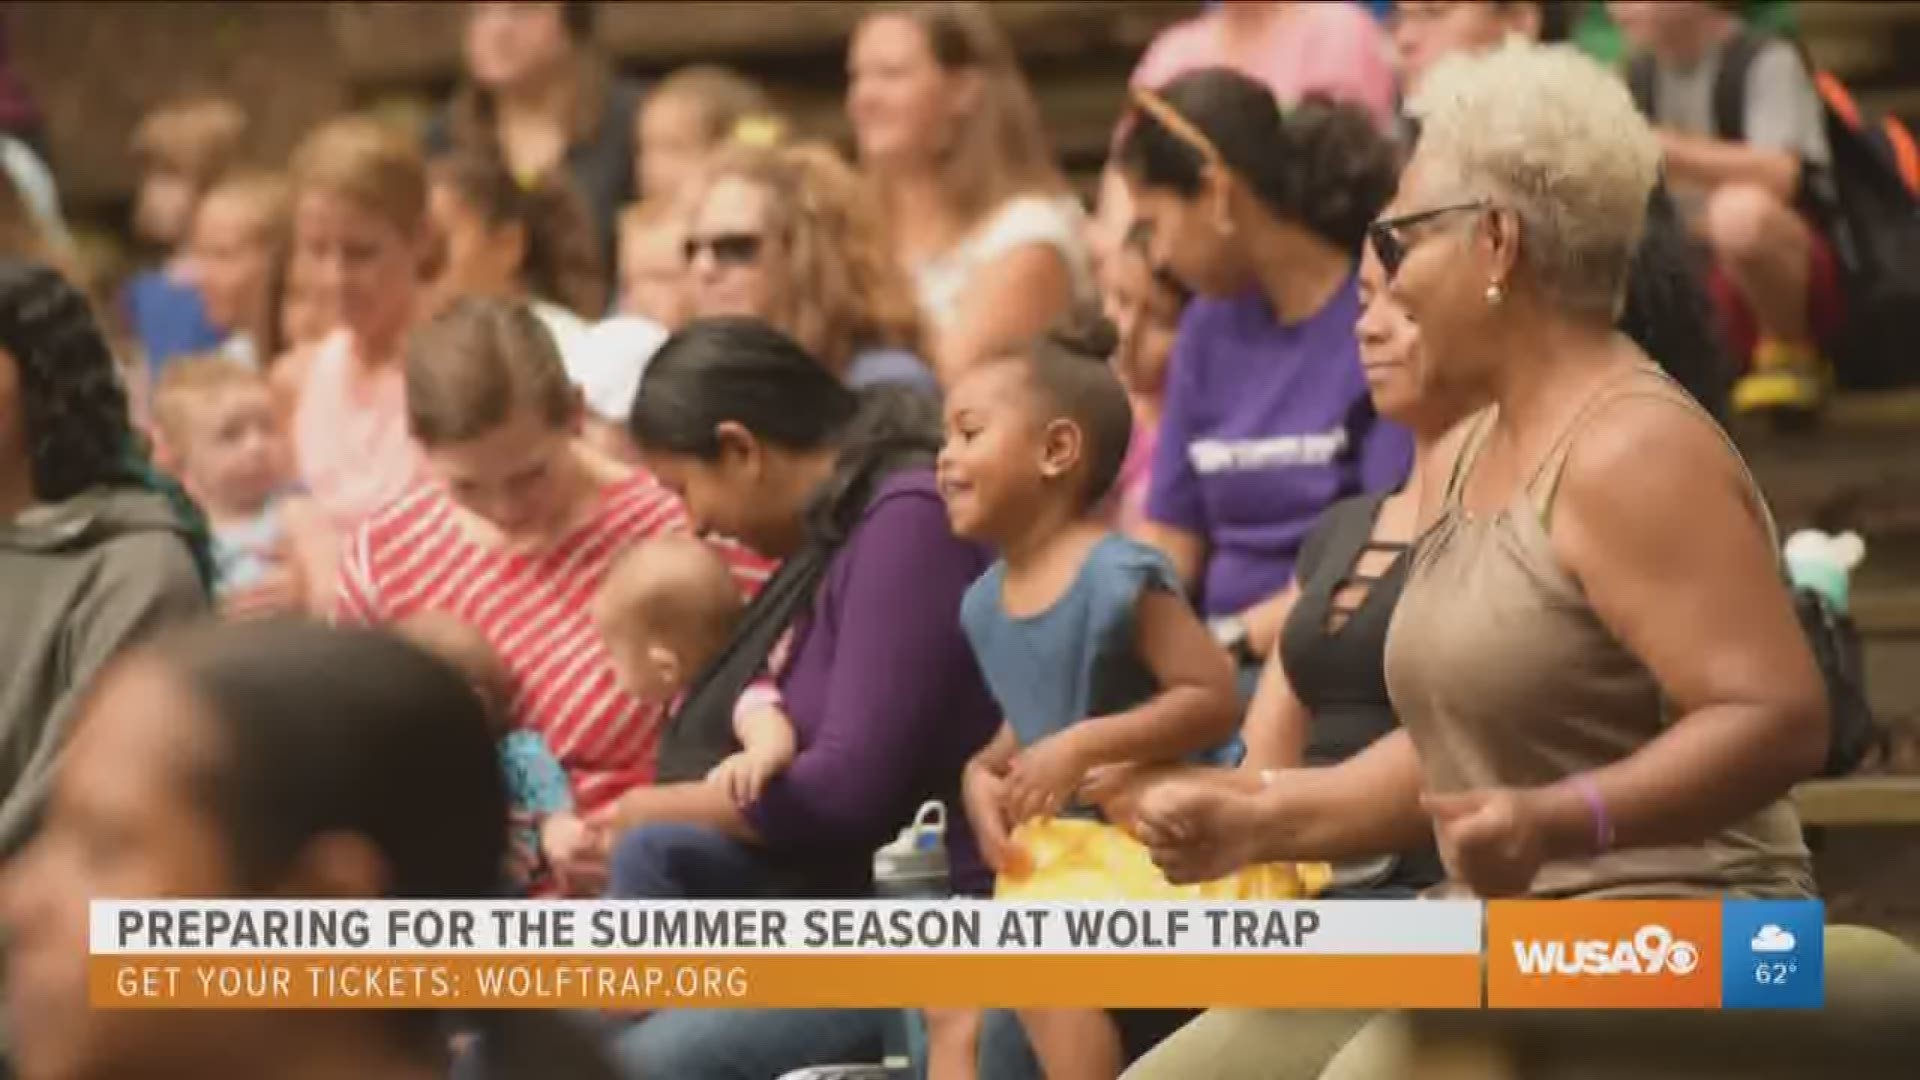 We get a behind the scenes look at how Wolf Trap, the only National Park dedicated to the performing arts, is preparing for the summer 2019 season. Get your tickets at www.WolfTrap.org